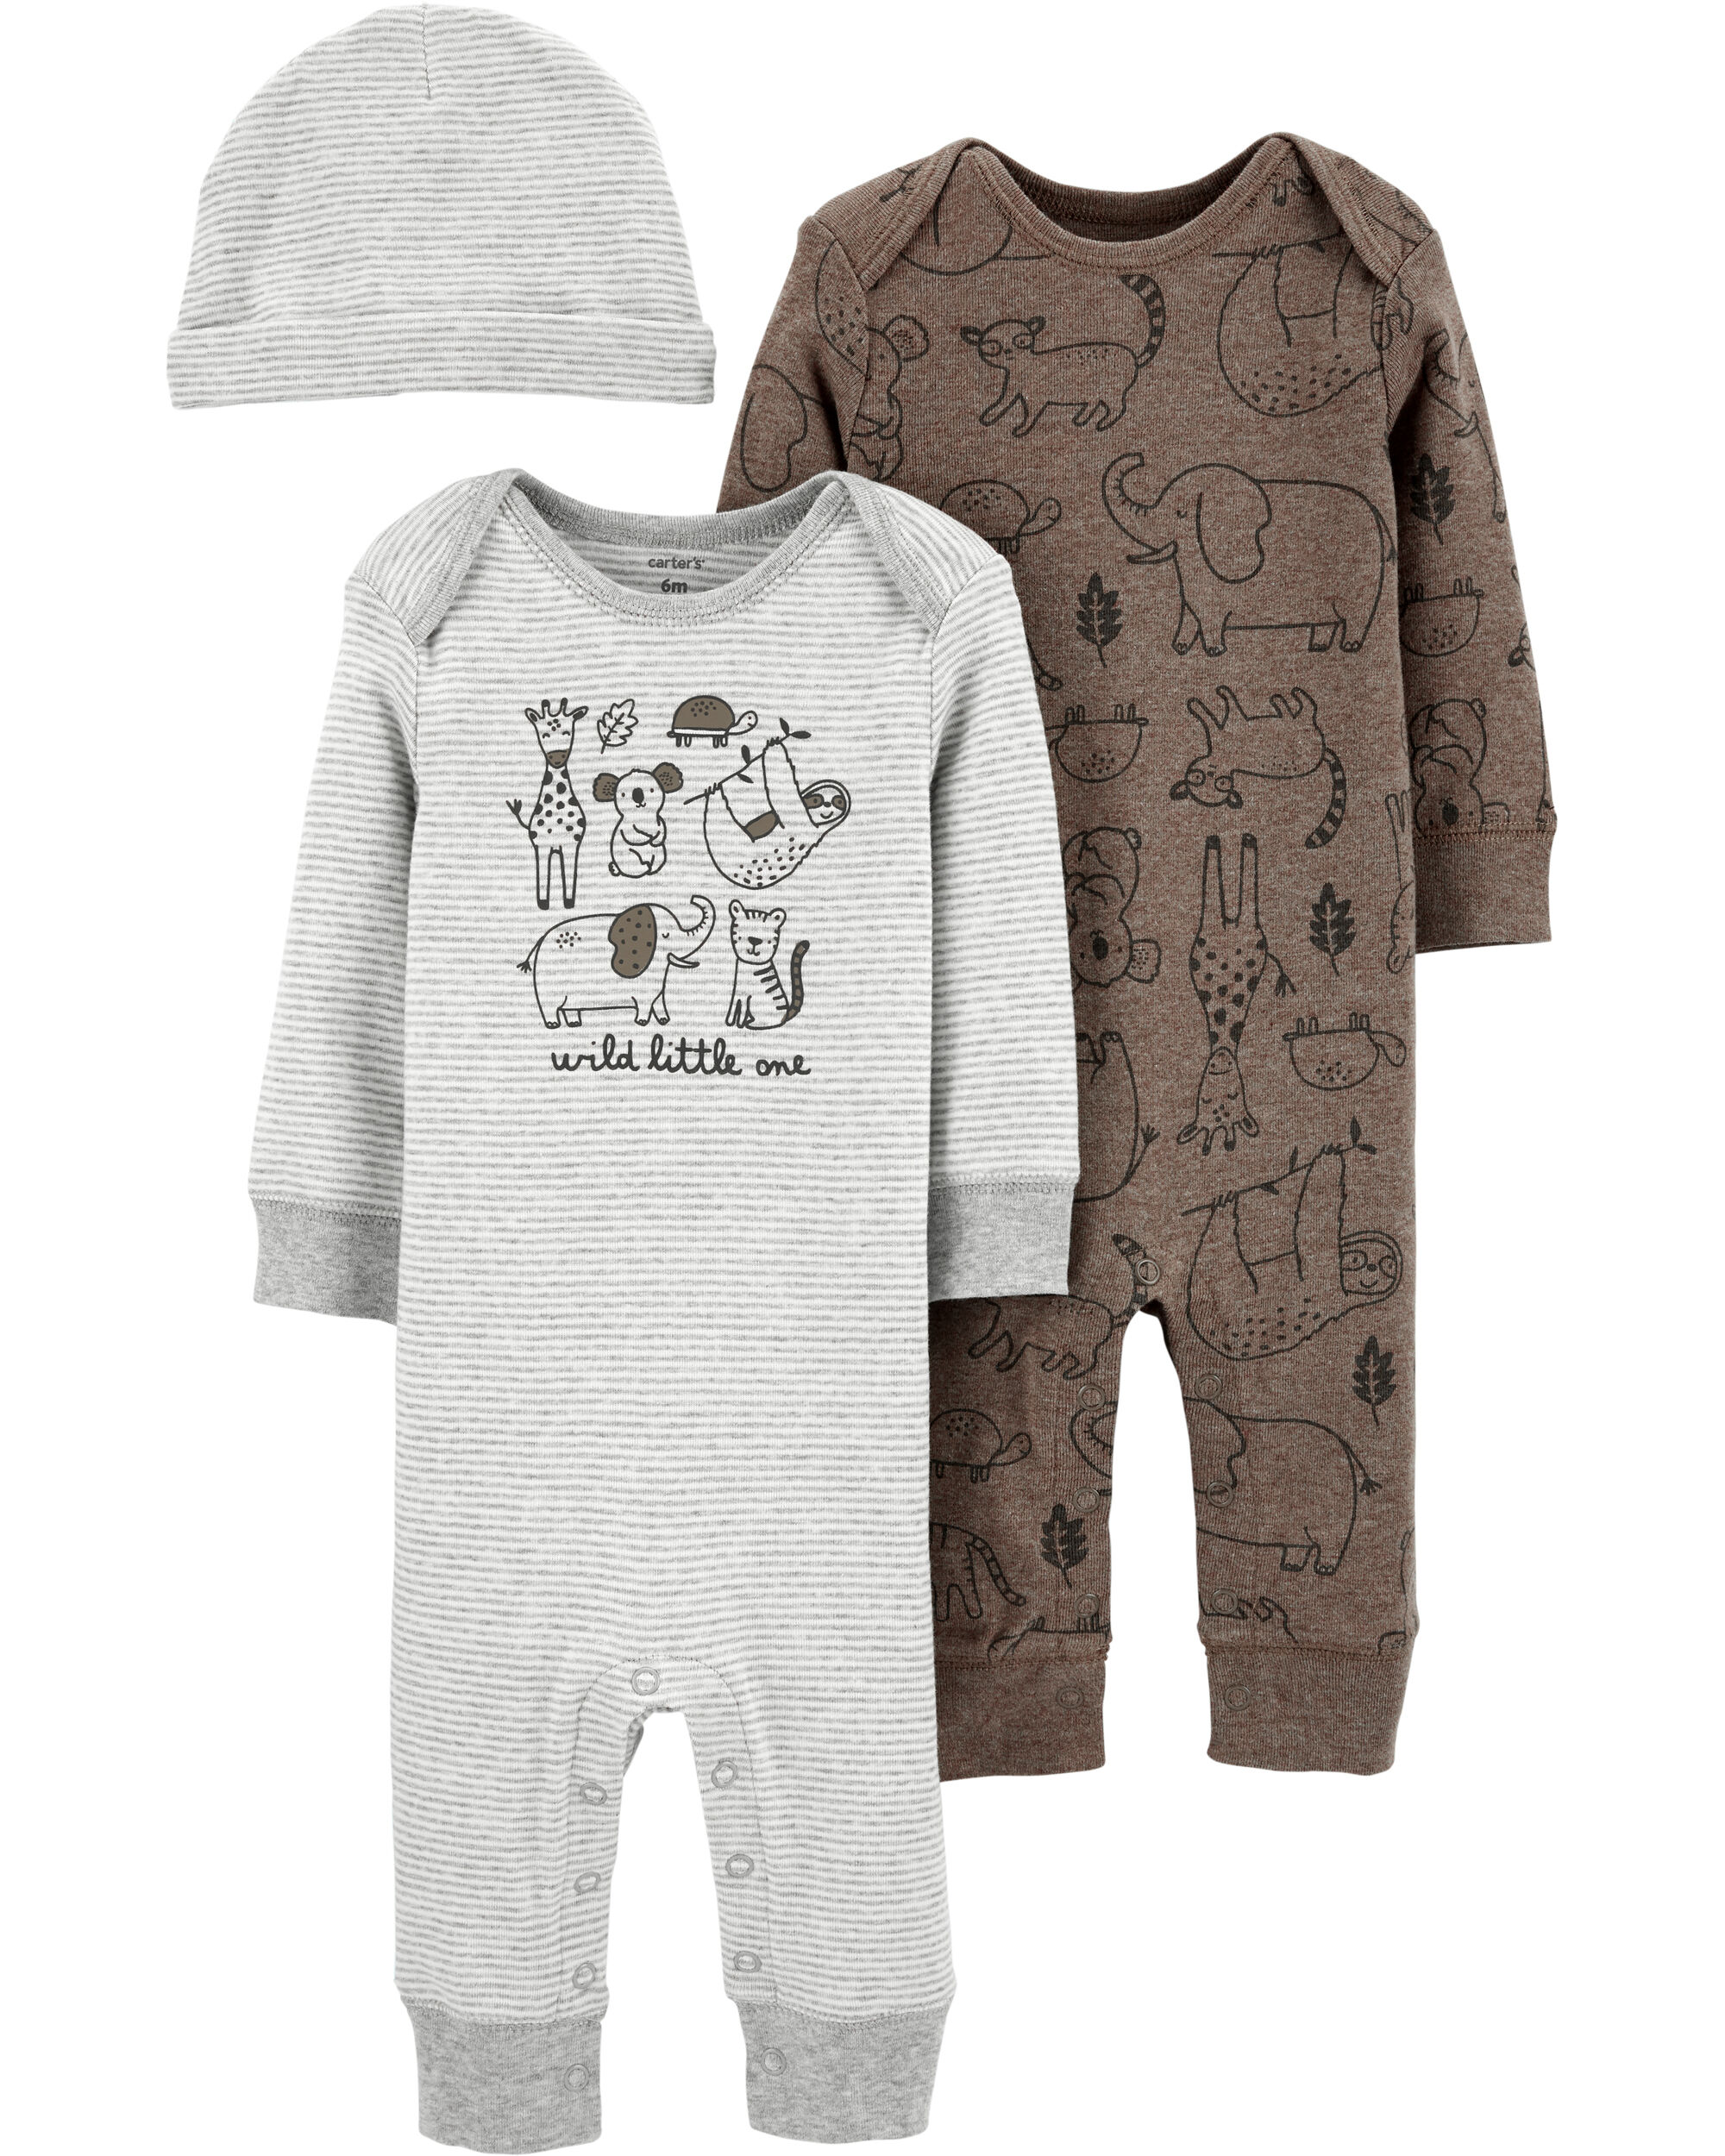 baby boy sets and outfits